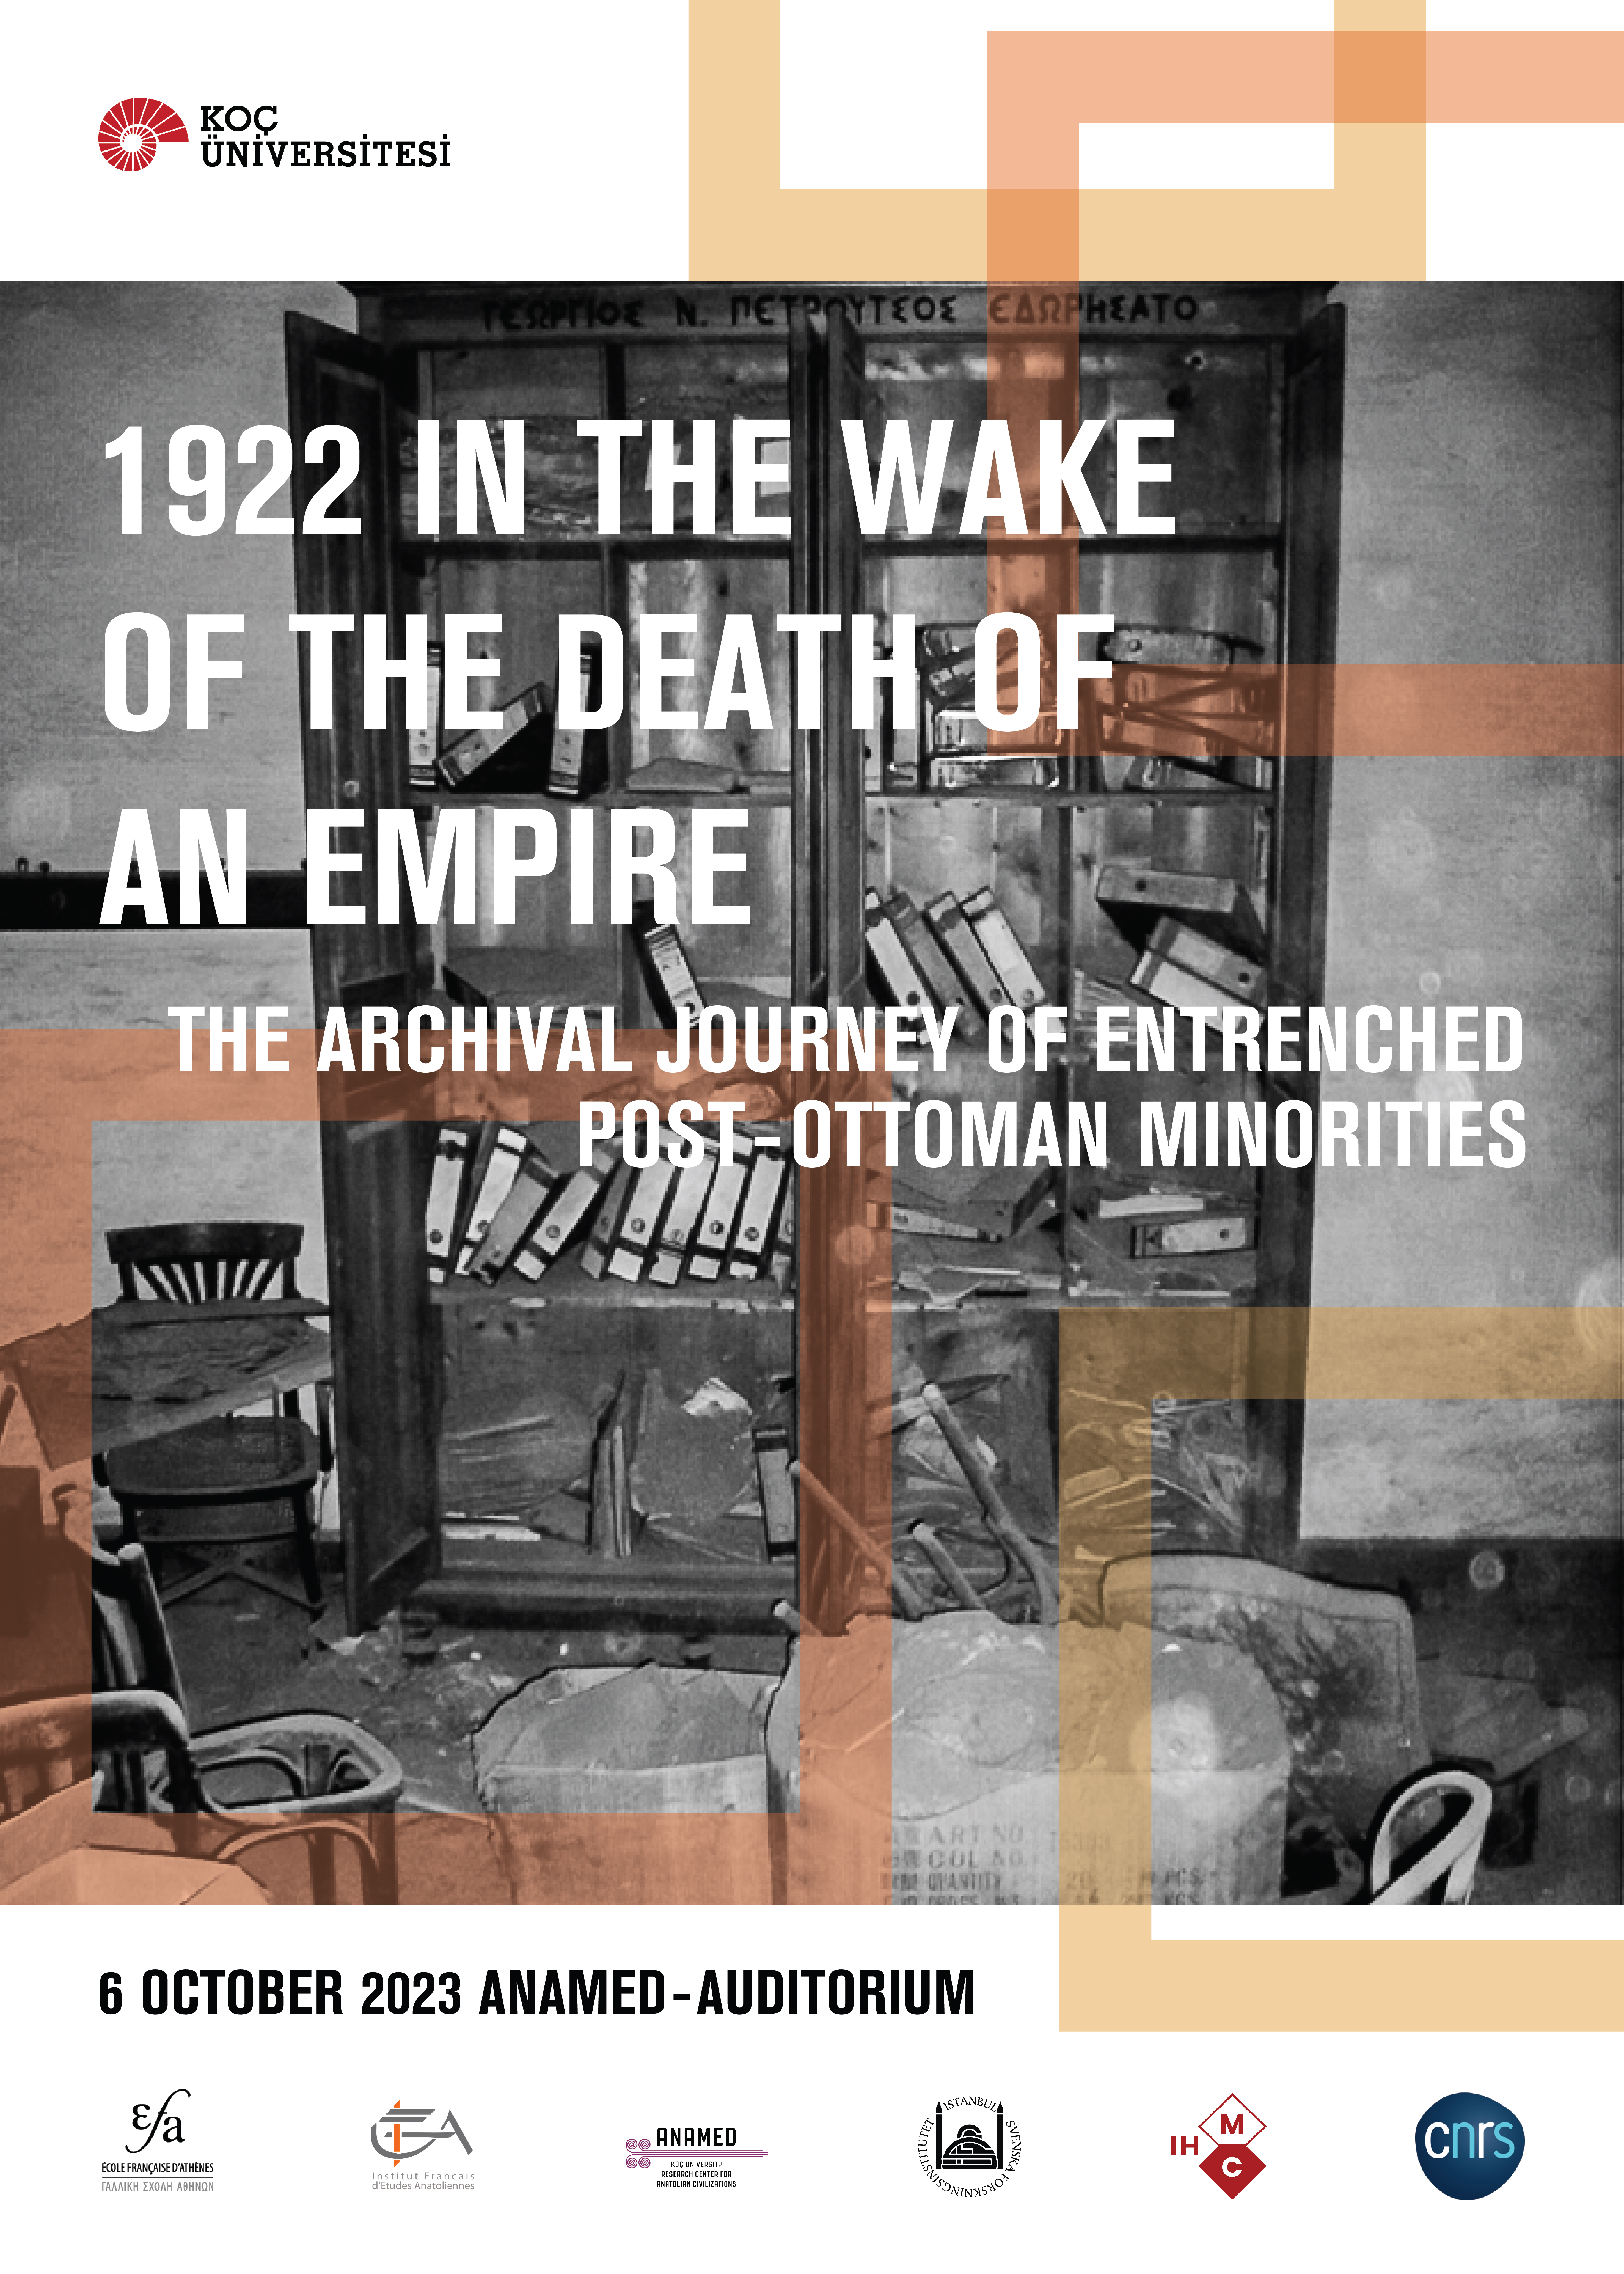 The archival Journey of entrenched post-ottoman Minorities